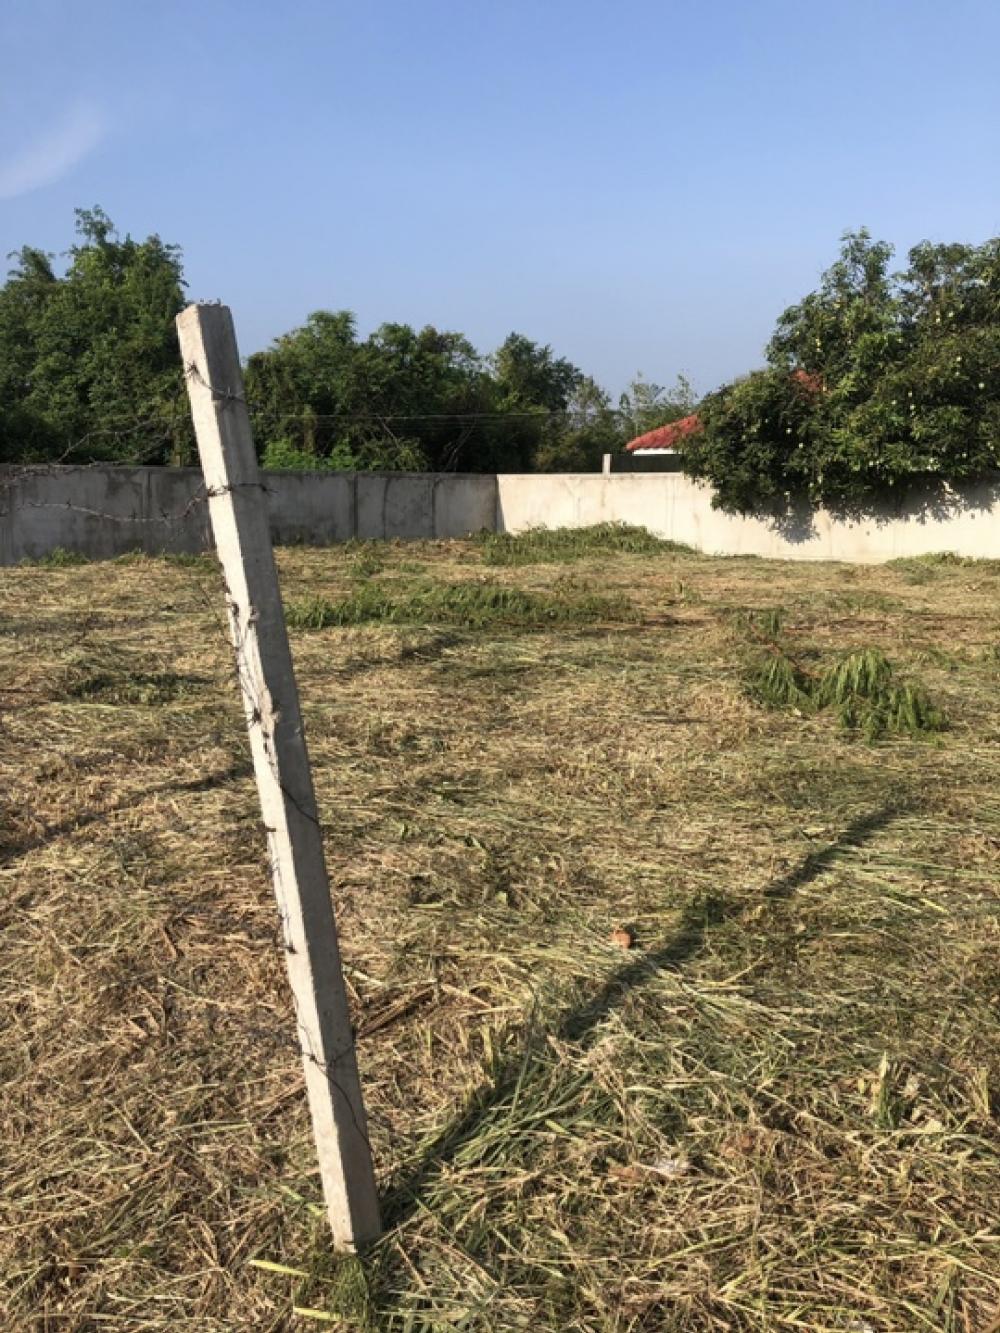 For SaleLandChiang Mai : Land for sale, area 85 square meters, near the Don Kaeo pass, Don Kaeo Subdistrict, Mae Rim District, Chiang Mai Province. 13 kilometers from the city of Chiang Mai, already filled with concrete fences on 3 sides, ready to build a house. Opposite to the A